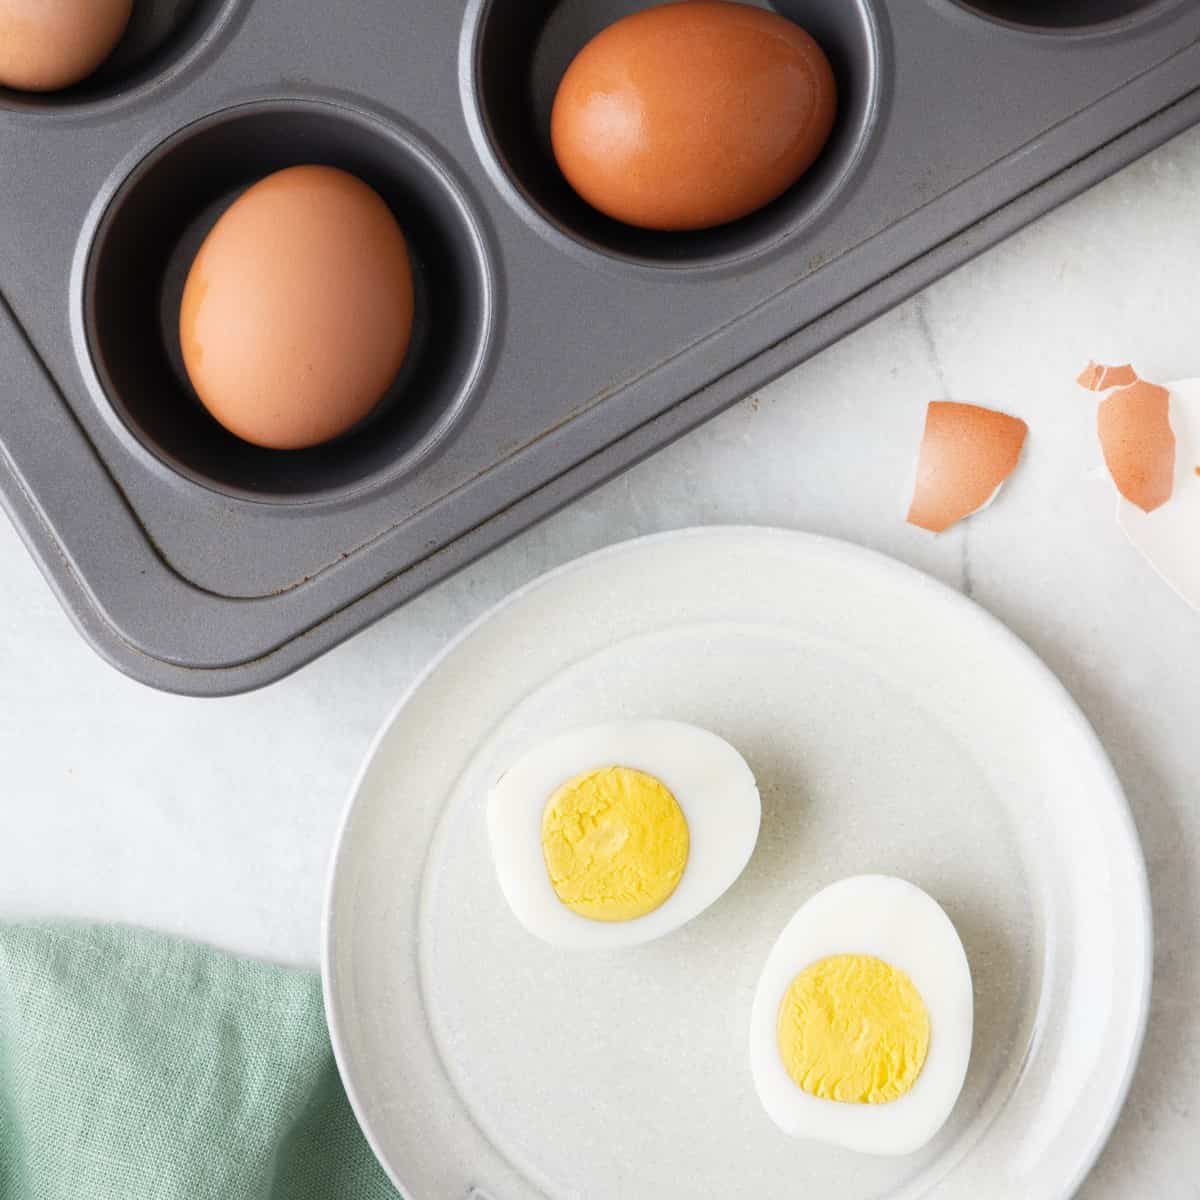 How to make hard boiled eggs in oven.